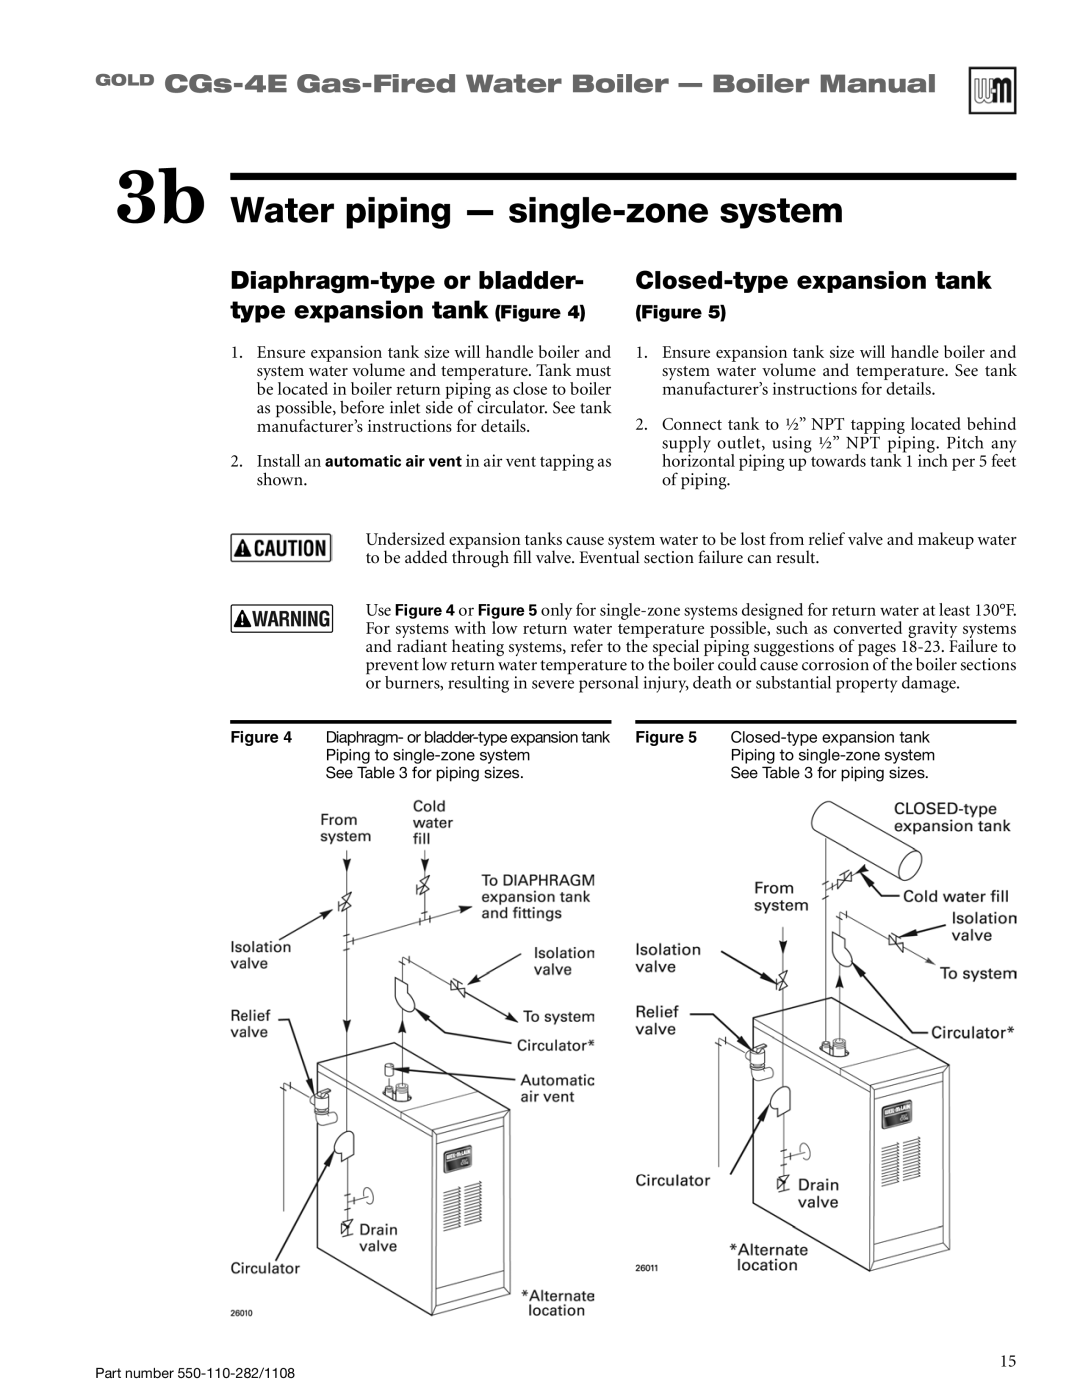 Weil-McLain CGS-4E manual 3b Water piping - single-zonesystem, Diaphragm-typeor bladder, Closed-typeexpansion tank 